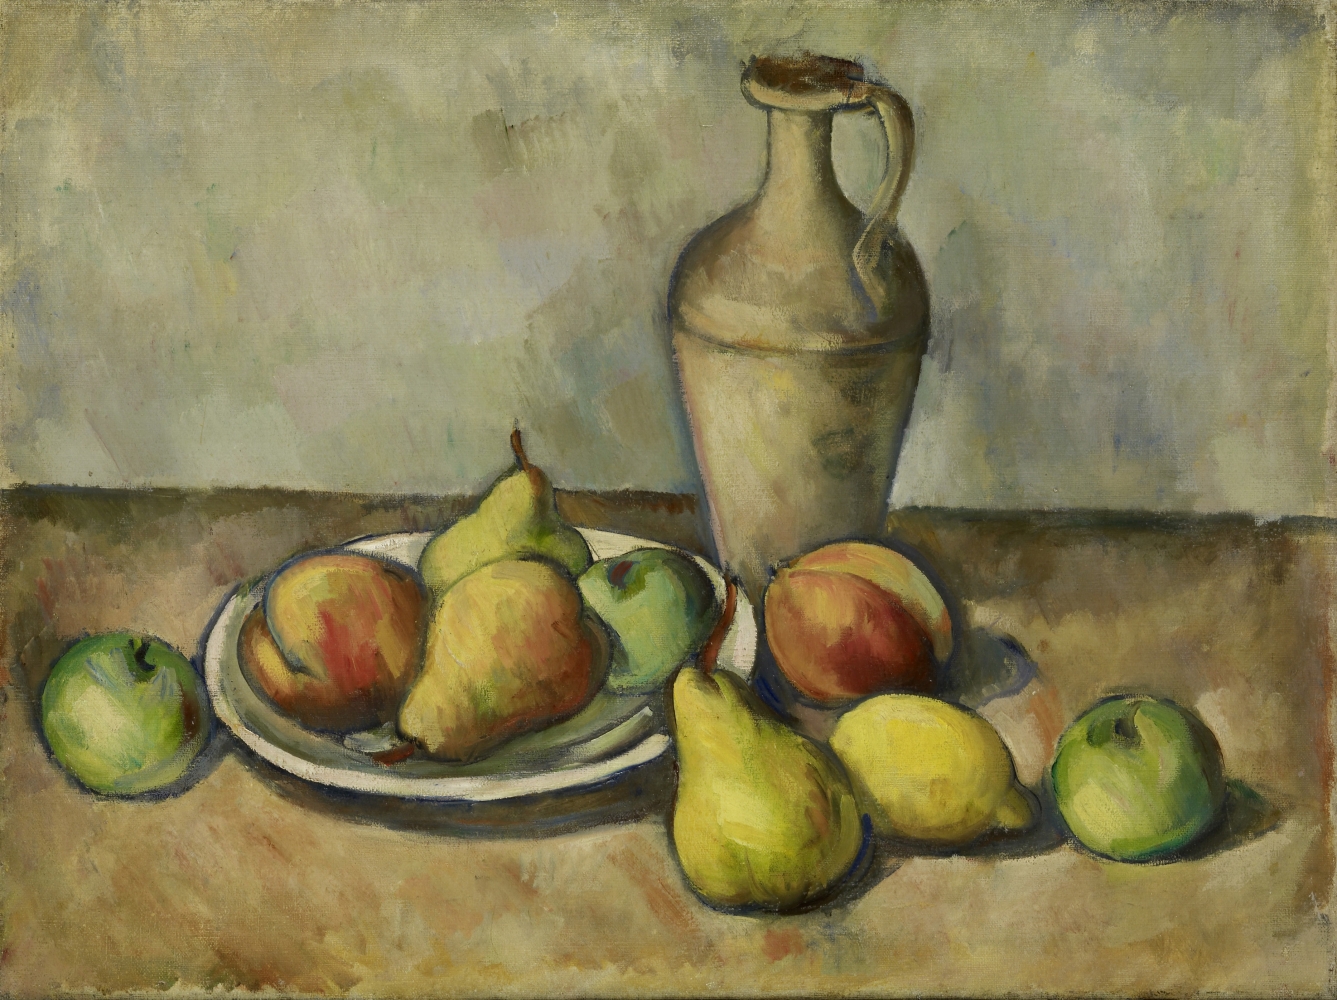 Still life on a table with apples, pears, a white plate, and a ceramic urn rendered in oil paint in muted colors in the style of Paul Cezanne